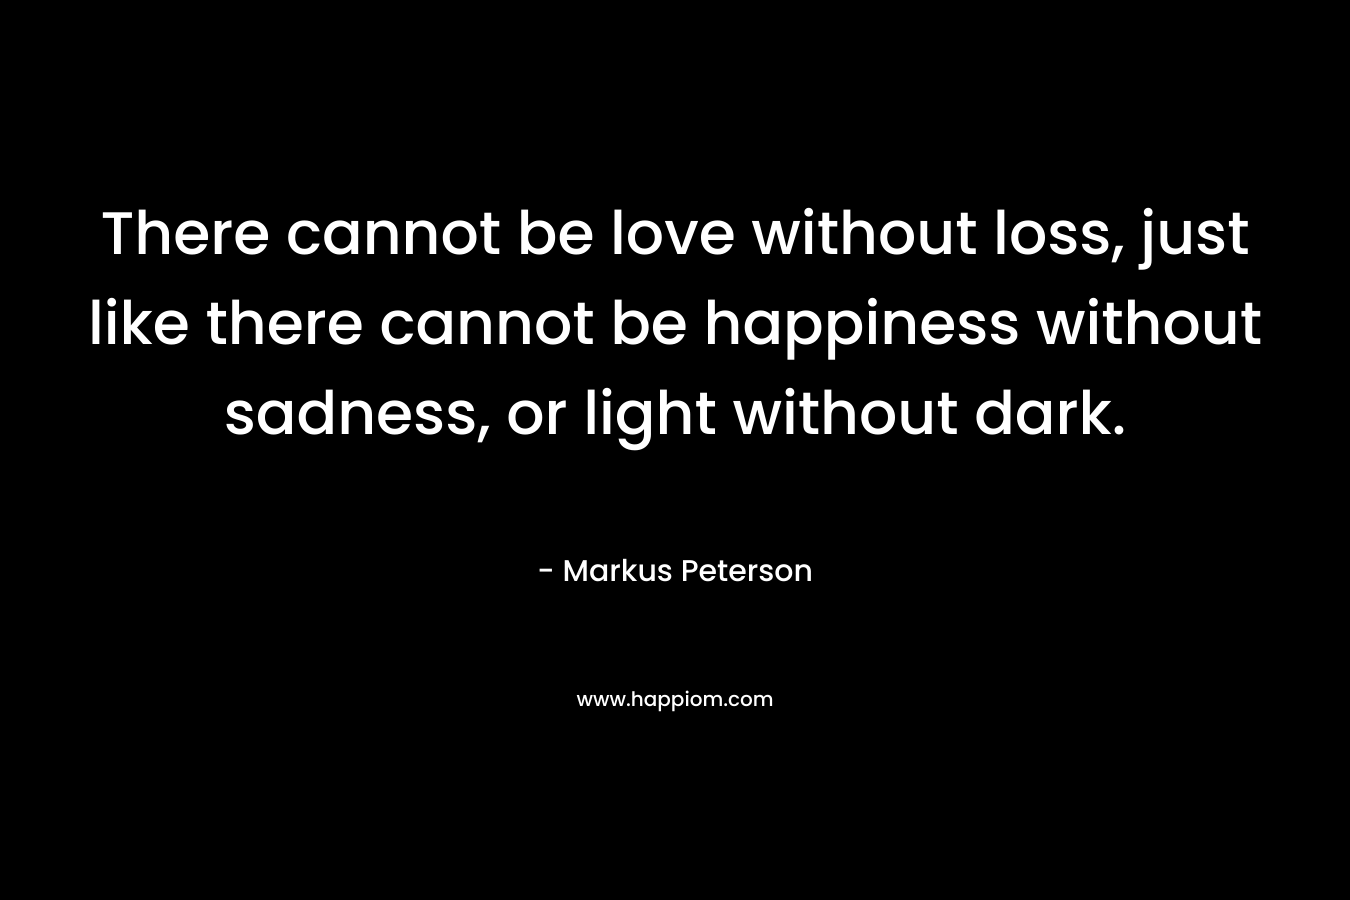 There cannot be love without loss, just like there cannot be happiness without sadness, or light without dark. – Markus Peterson